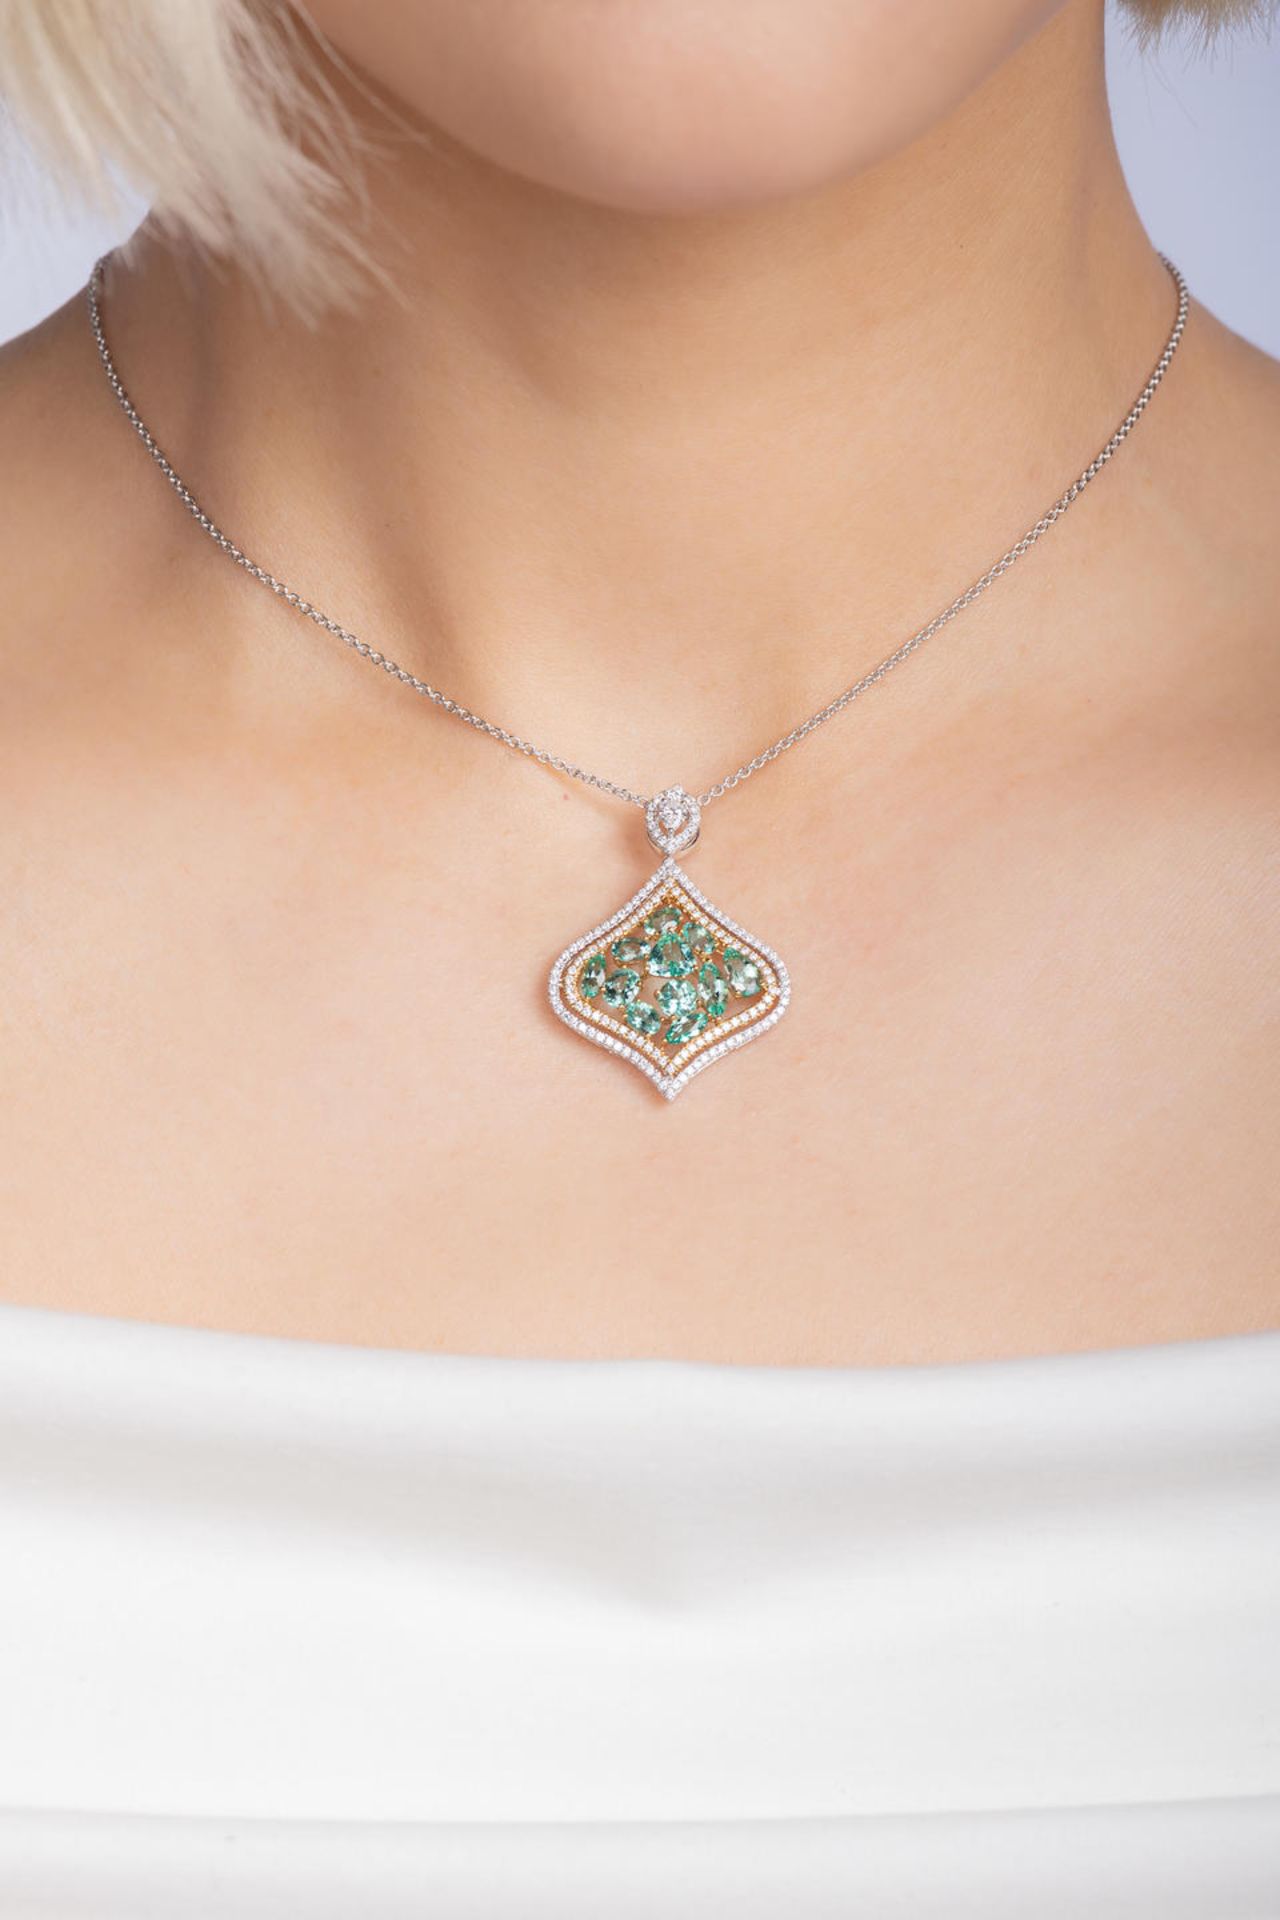 EMERALD AND DIAMOND PENDANT NECKLACE - Image 2 of 2